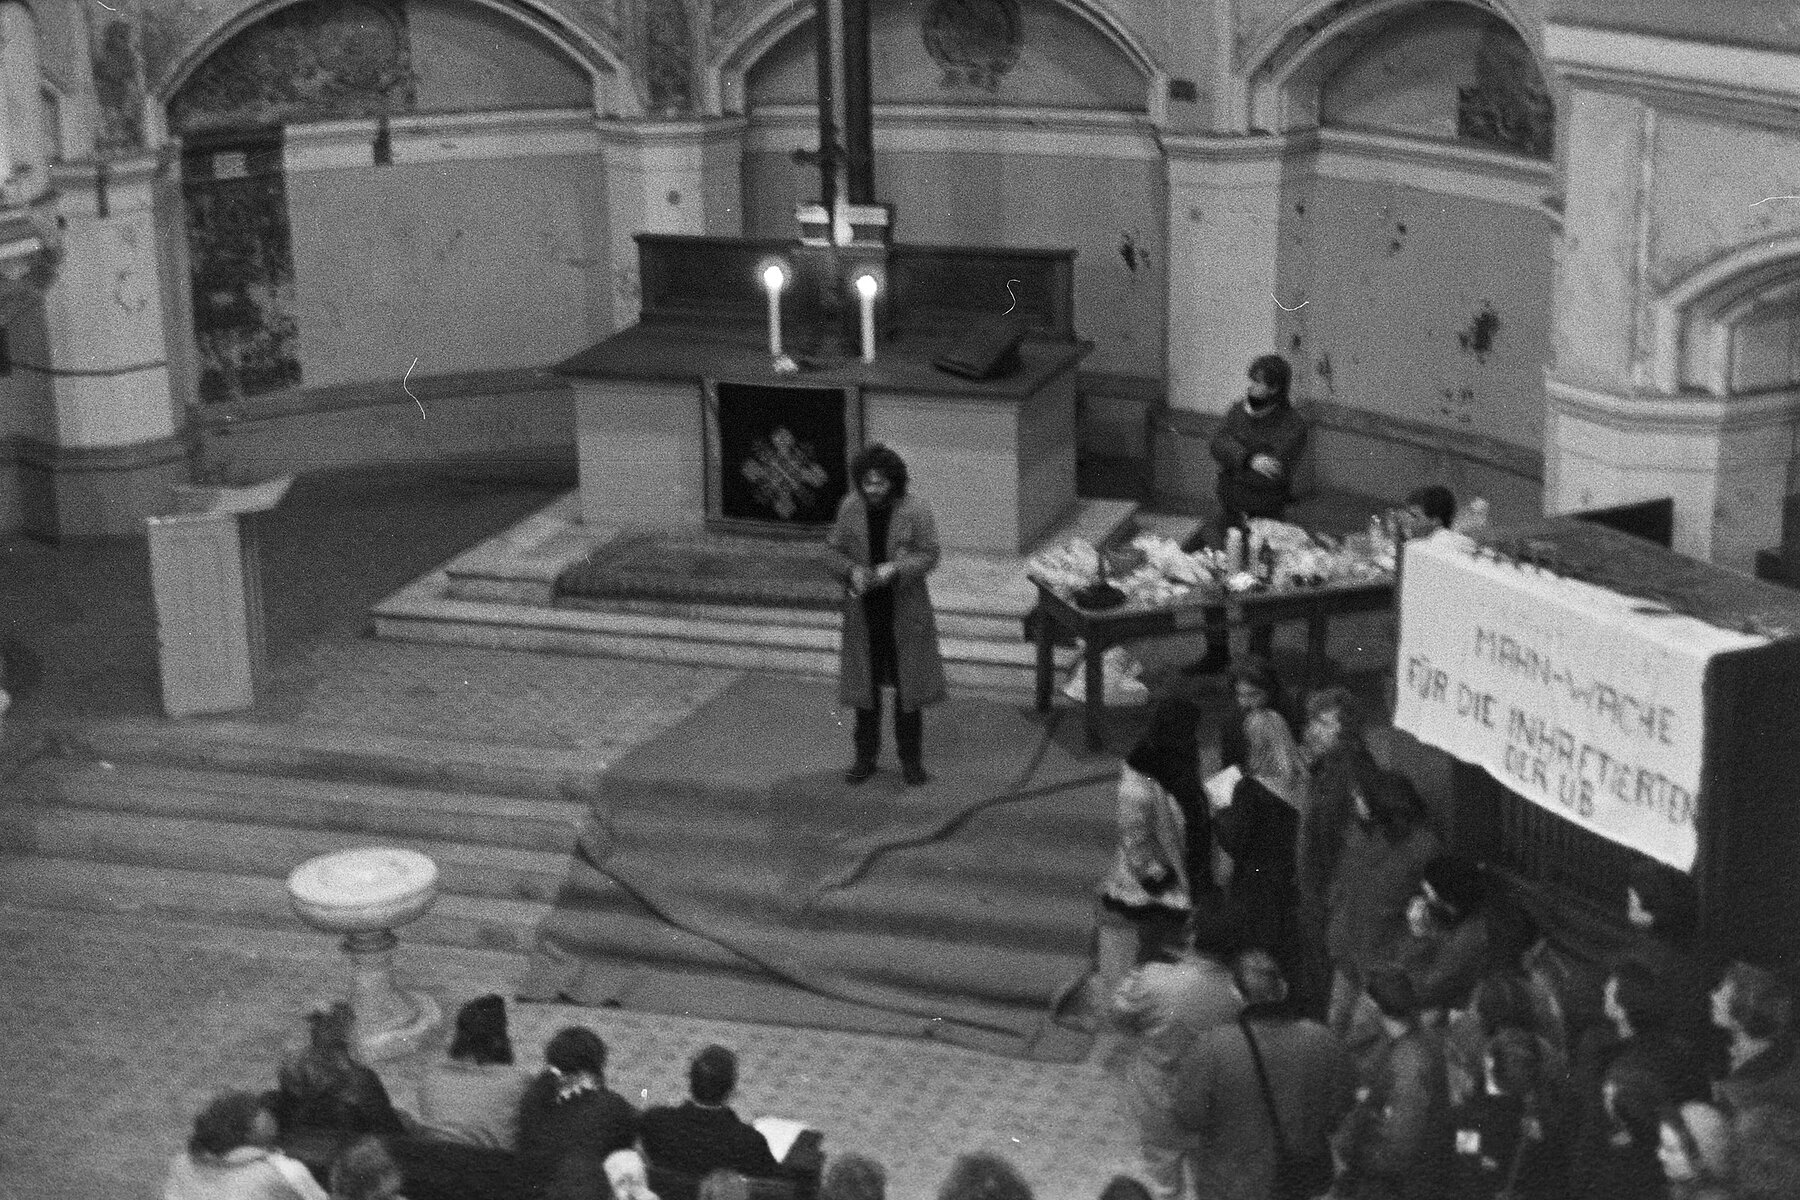 Members of the Umweltbibliothek hold a vigil in the Zionskirche (Zions Church). A person addresses the audience from the altar.